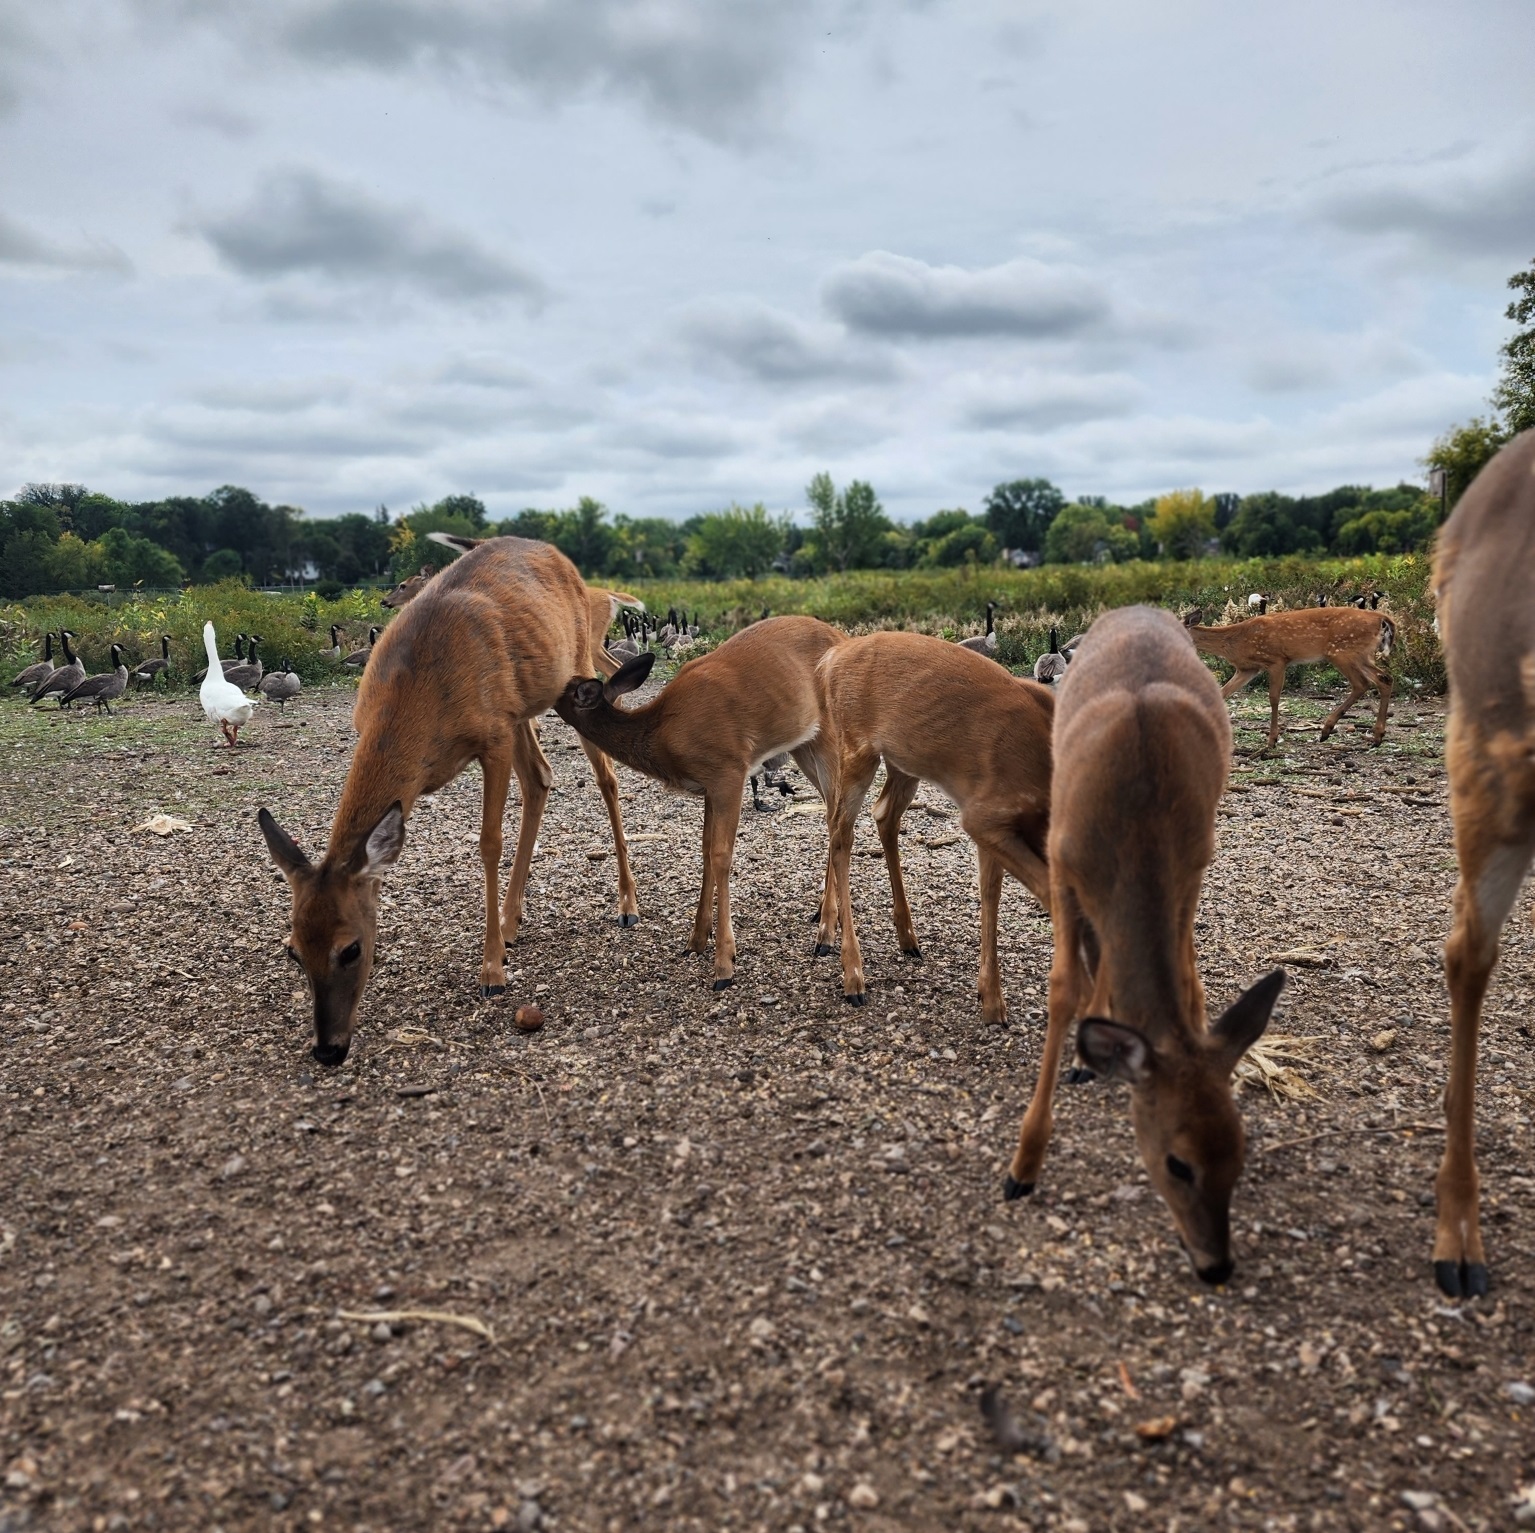 A group of six deer eating grains from the ground.